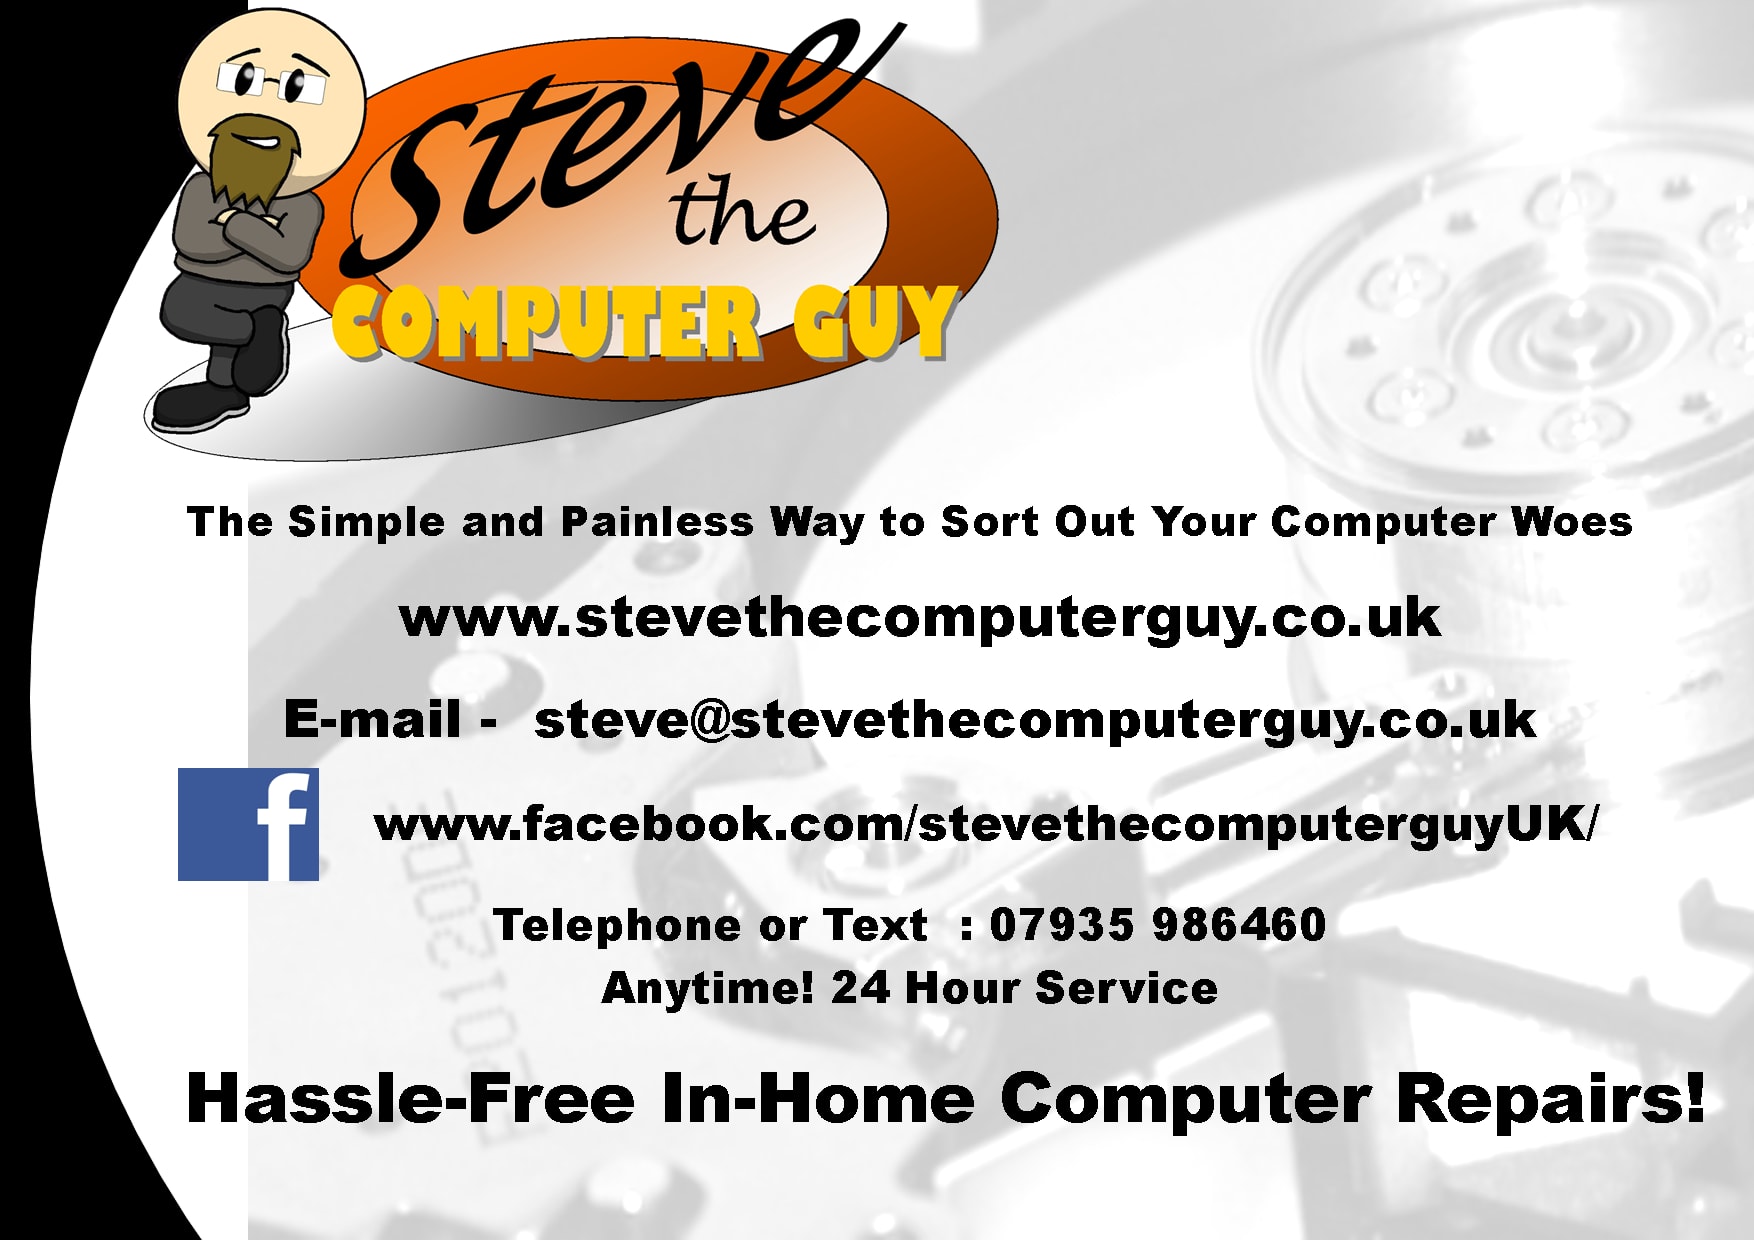 Steve the Computer Guy Inverurie 07935 986460